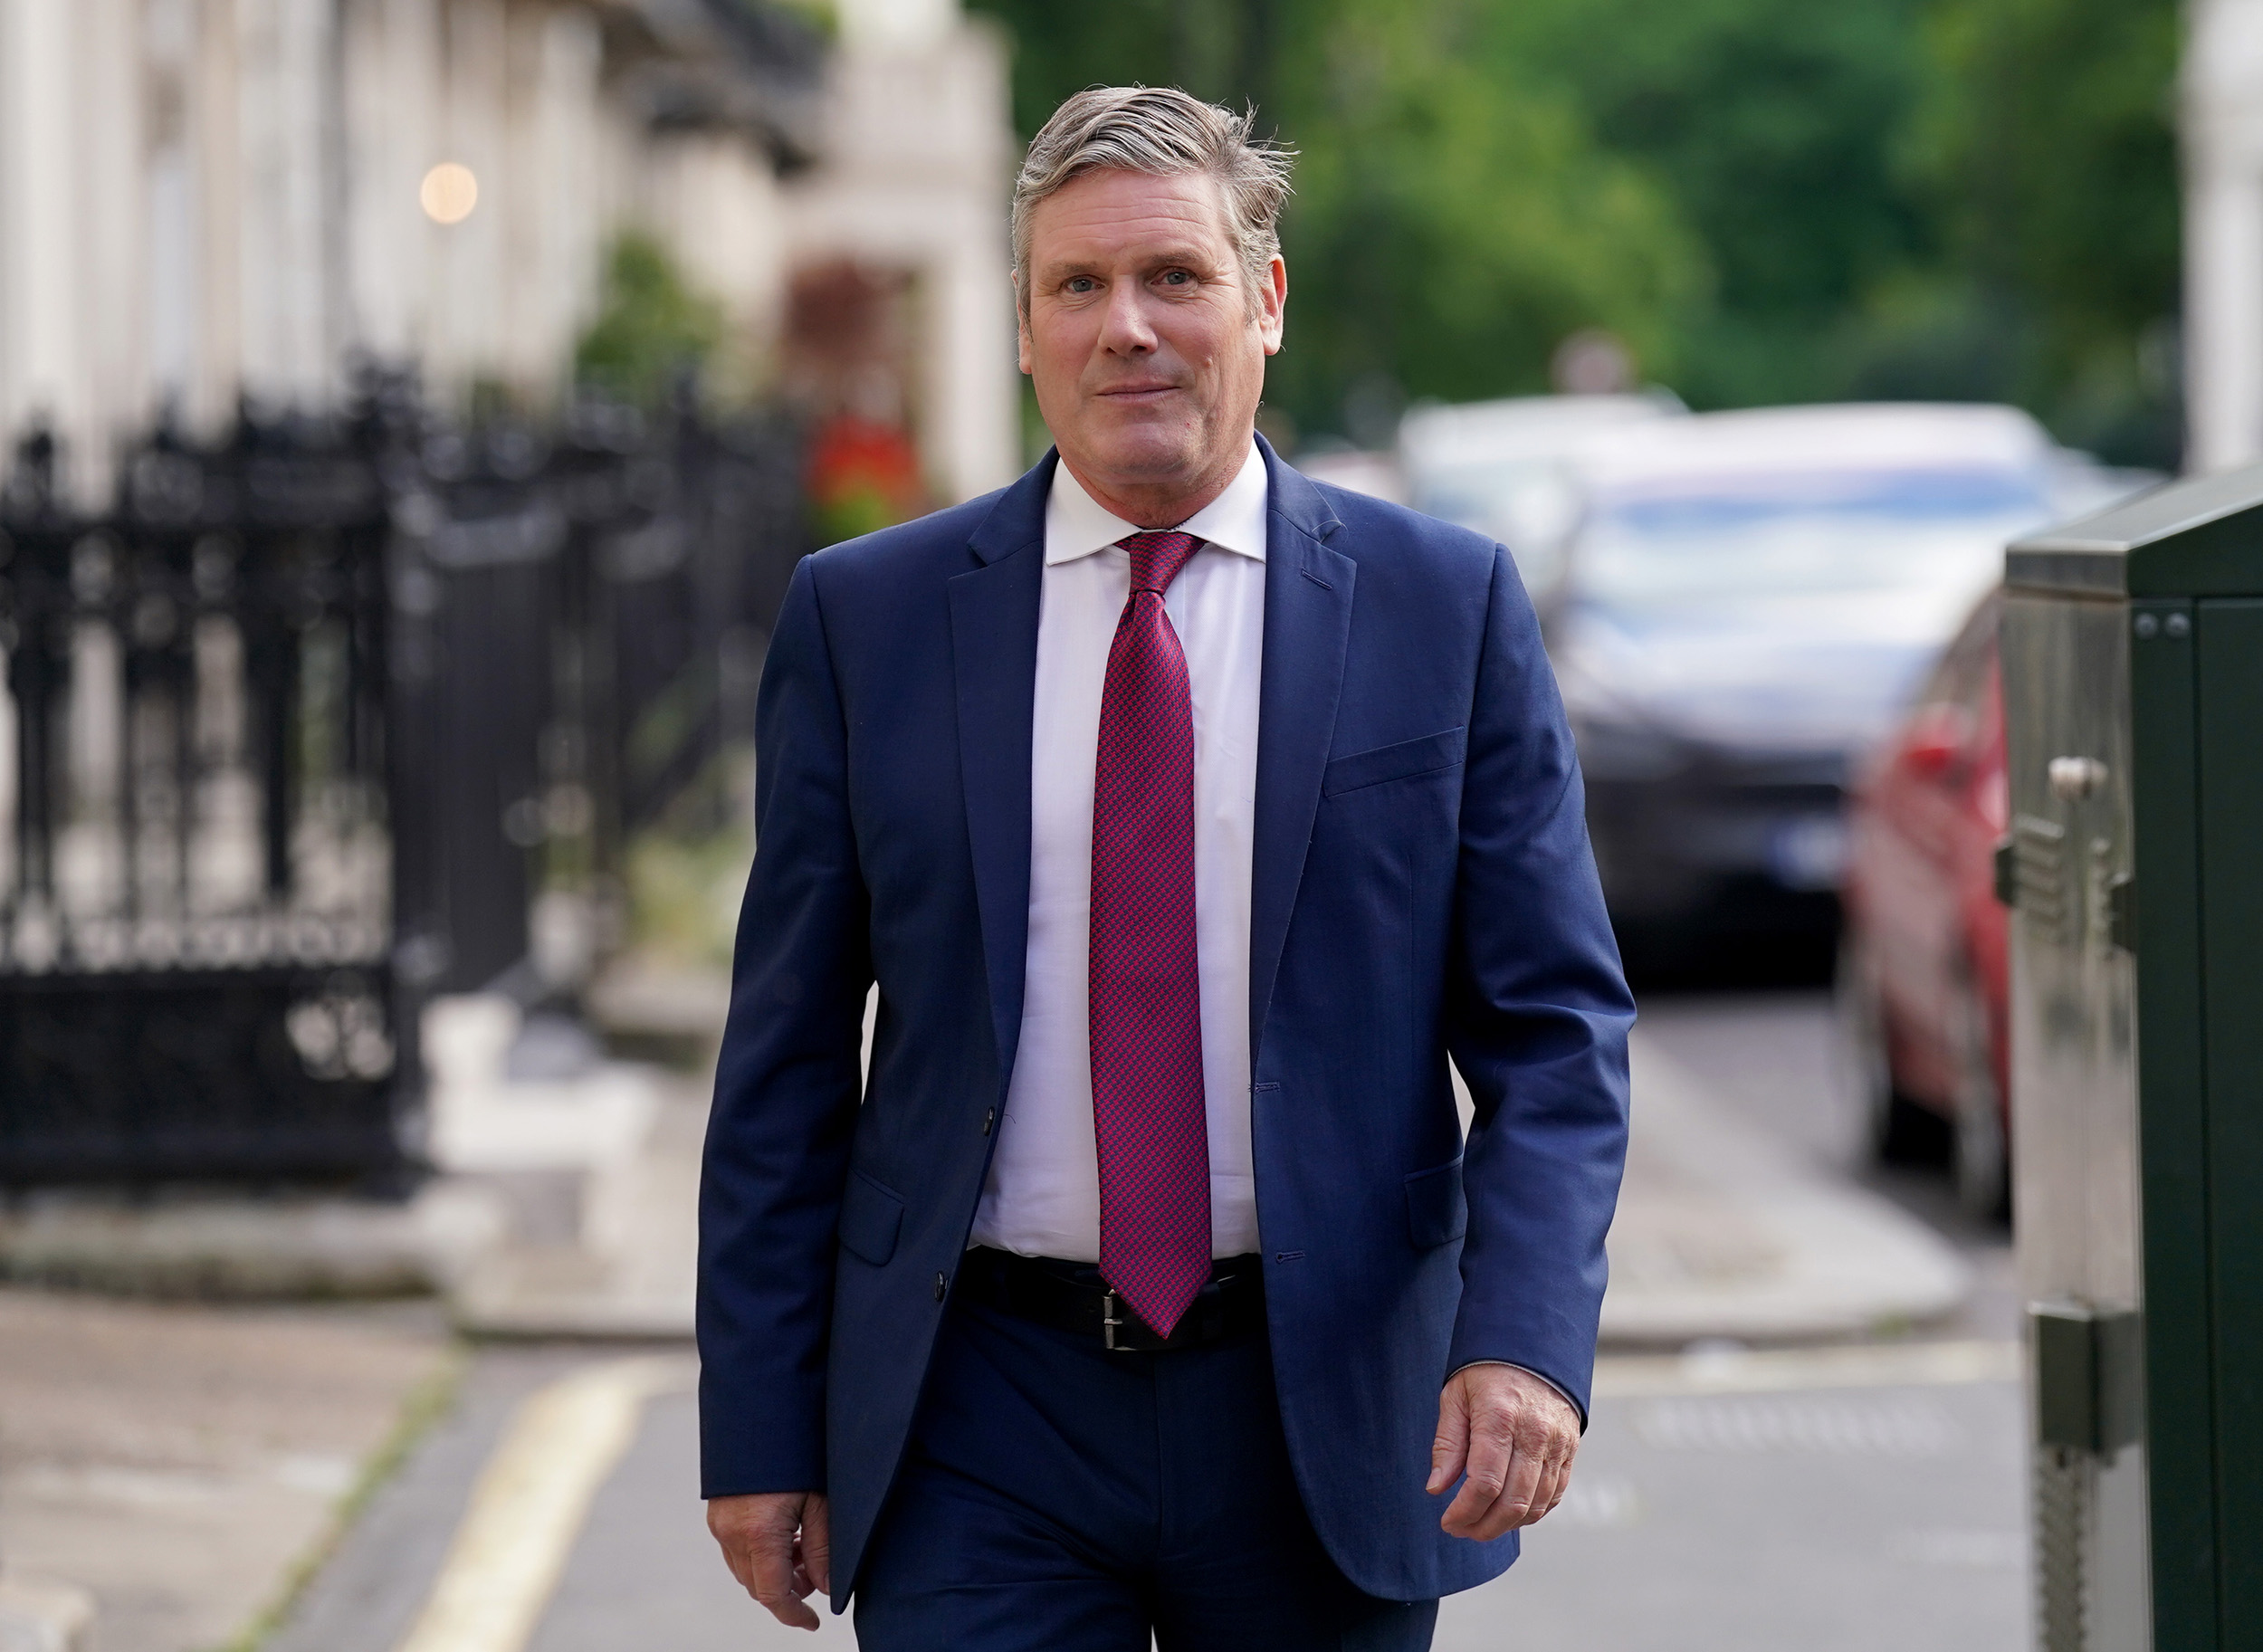 Labour leader Sir Keir Starmer in London, England, on July 4.